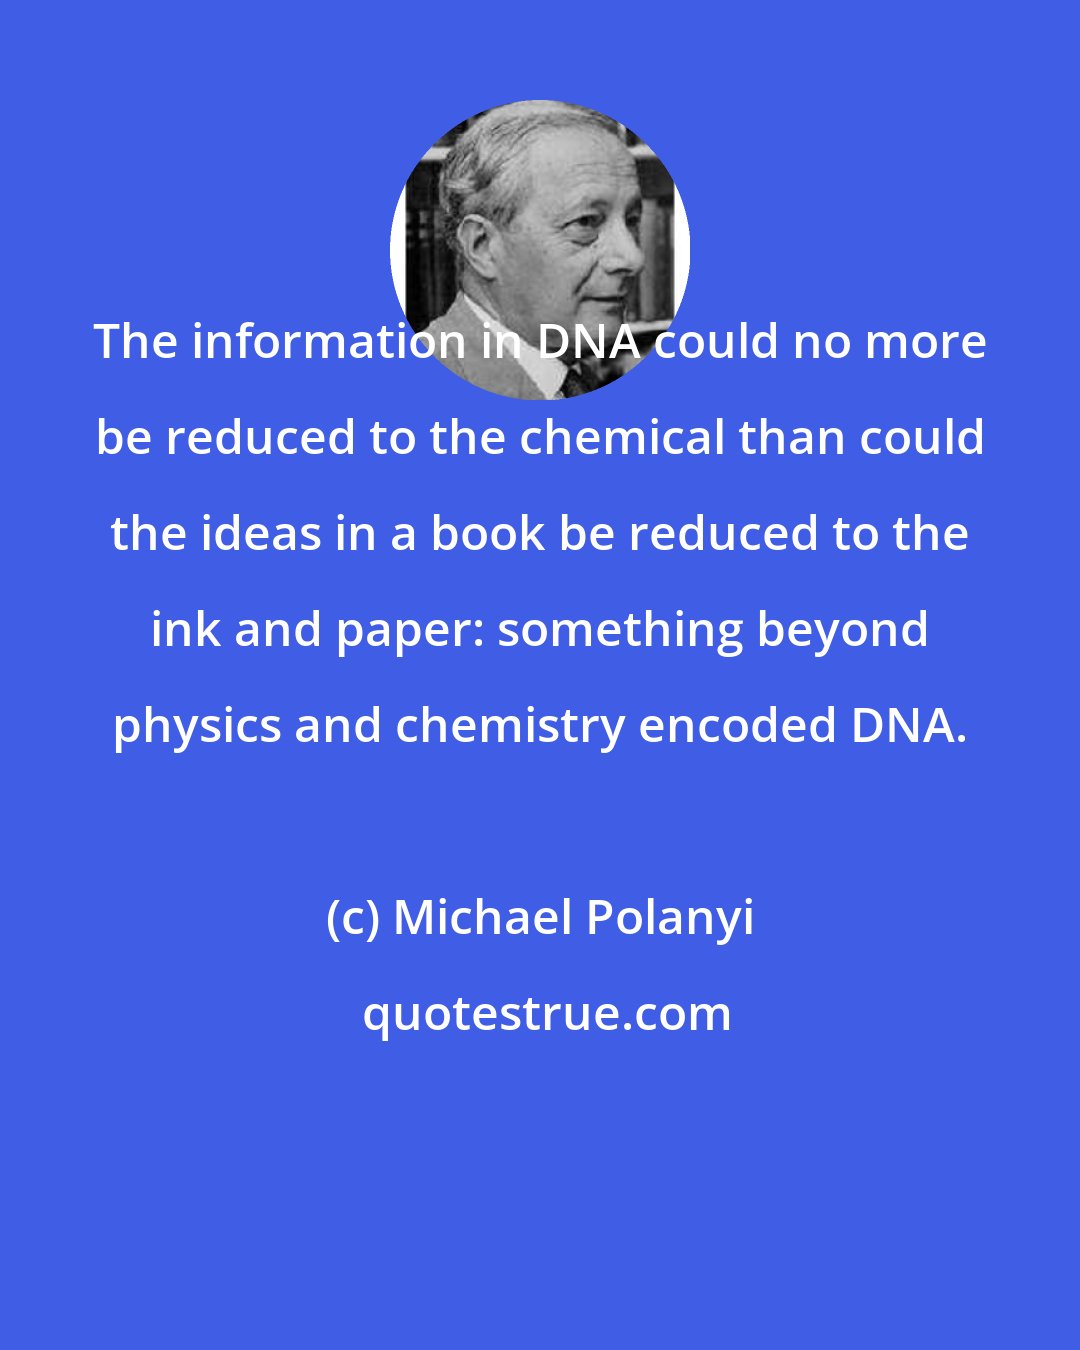 Michael Polanyi: The information in DNA could no more be reduced to the chemical than could the ideas in a book be reduced to the ink and paper: something beyond physics and chemistry encoded DNA.